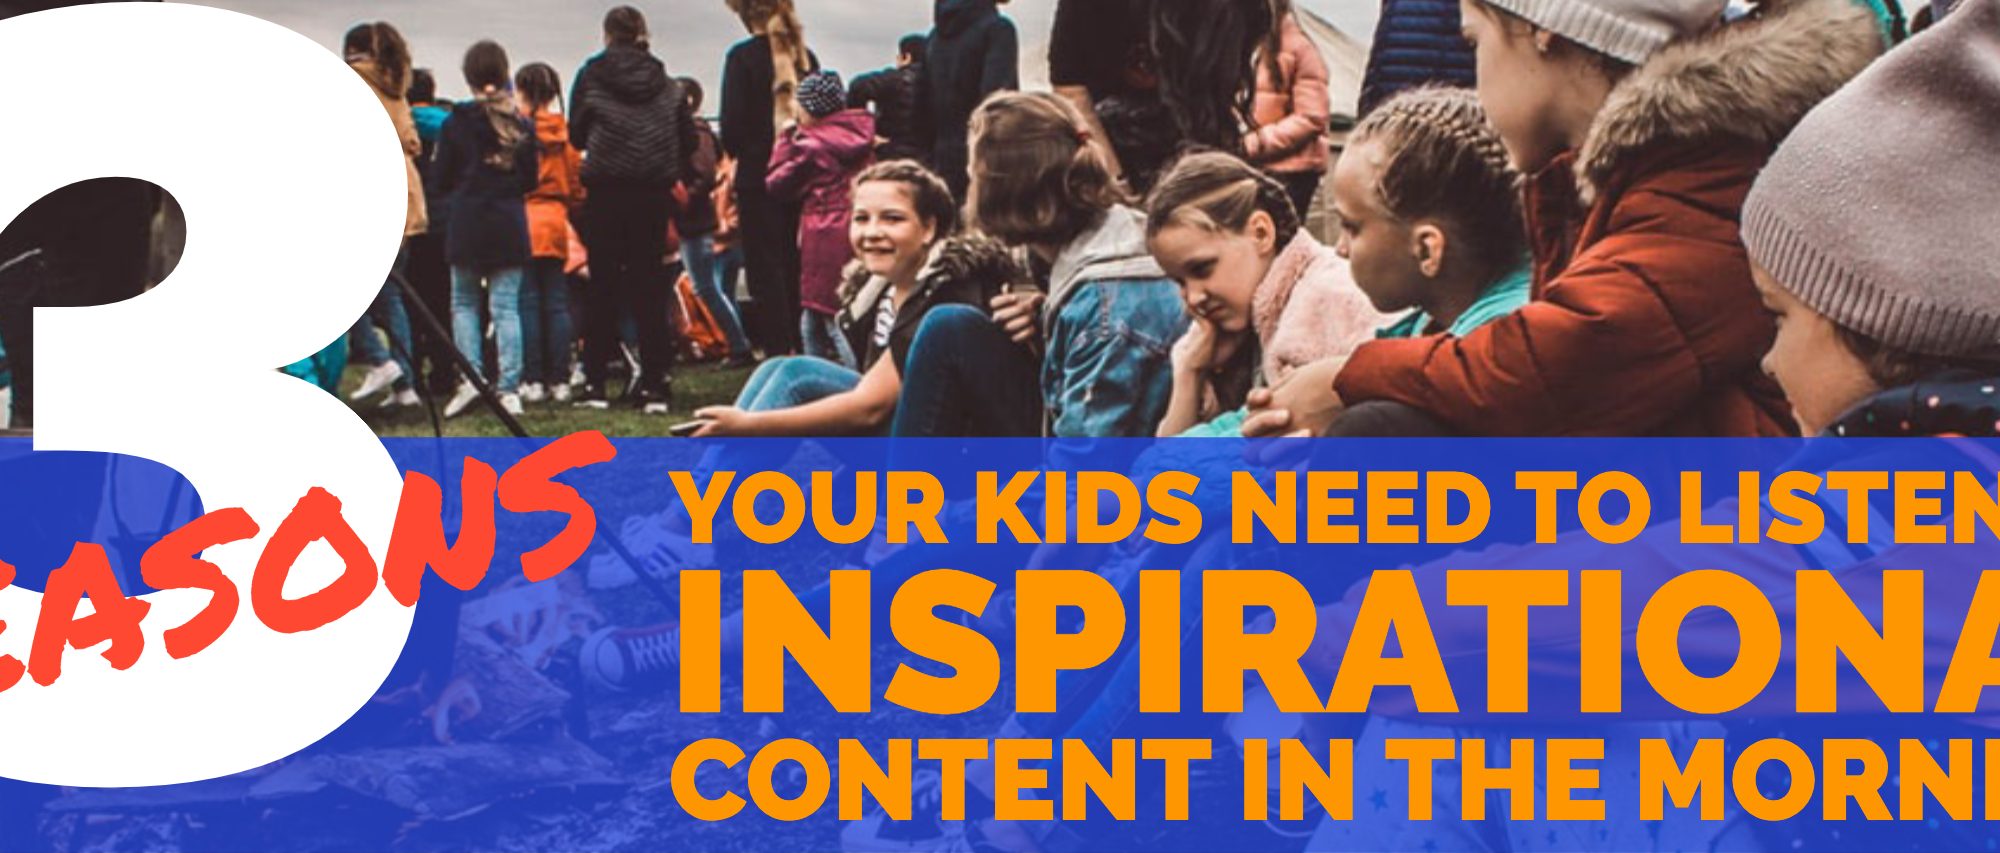 YOUR KIDS NEED TO LISTEN TO INSPIRATIONAL CONTENT IN THE MORNING global sales coach paul argueta motivational speaker tedx speaker author contributor sales trainer